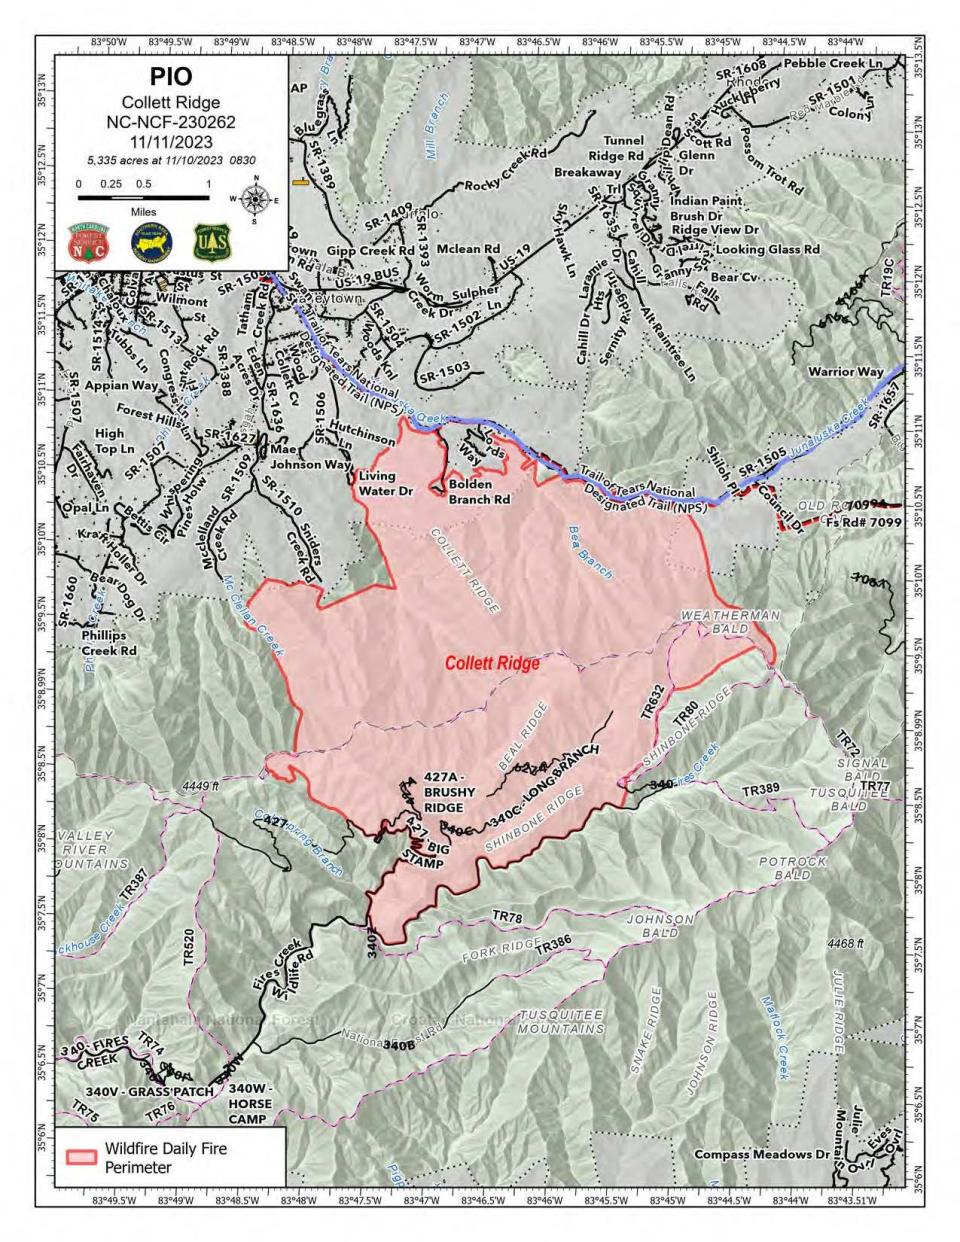 The Collett Ridge Fire has been burning since Oct. 23 in the Cherokee County area of Nantahala National Forest. As of Nov. 11 it is at 5,335 acres and is 15% contained, according to the U.S. Forest Service.